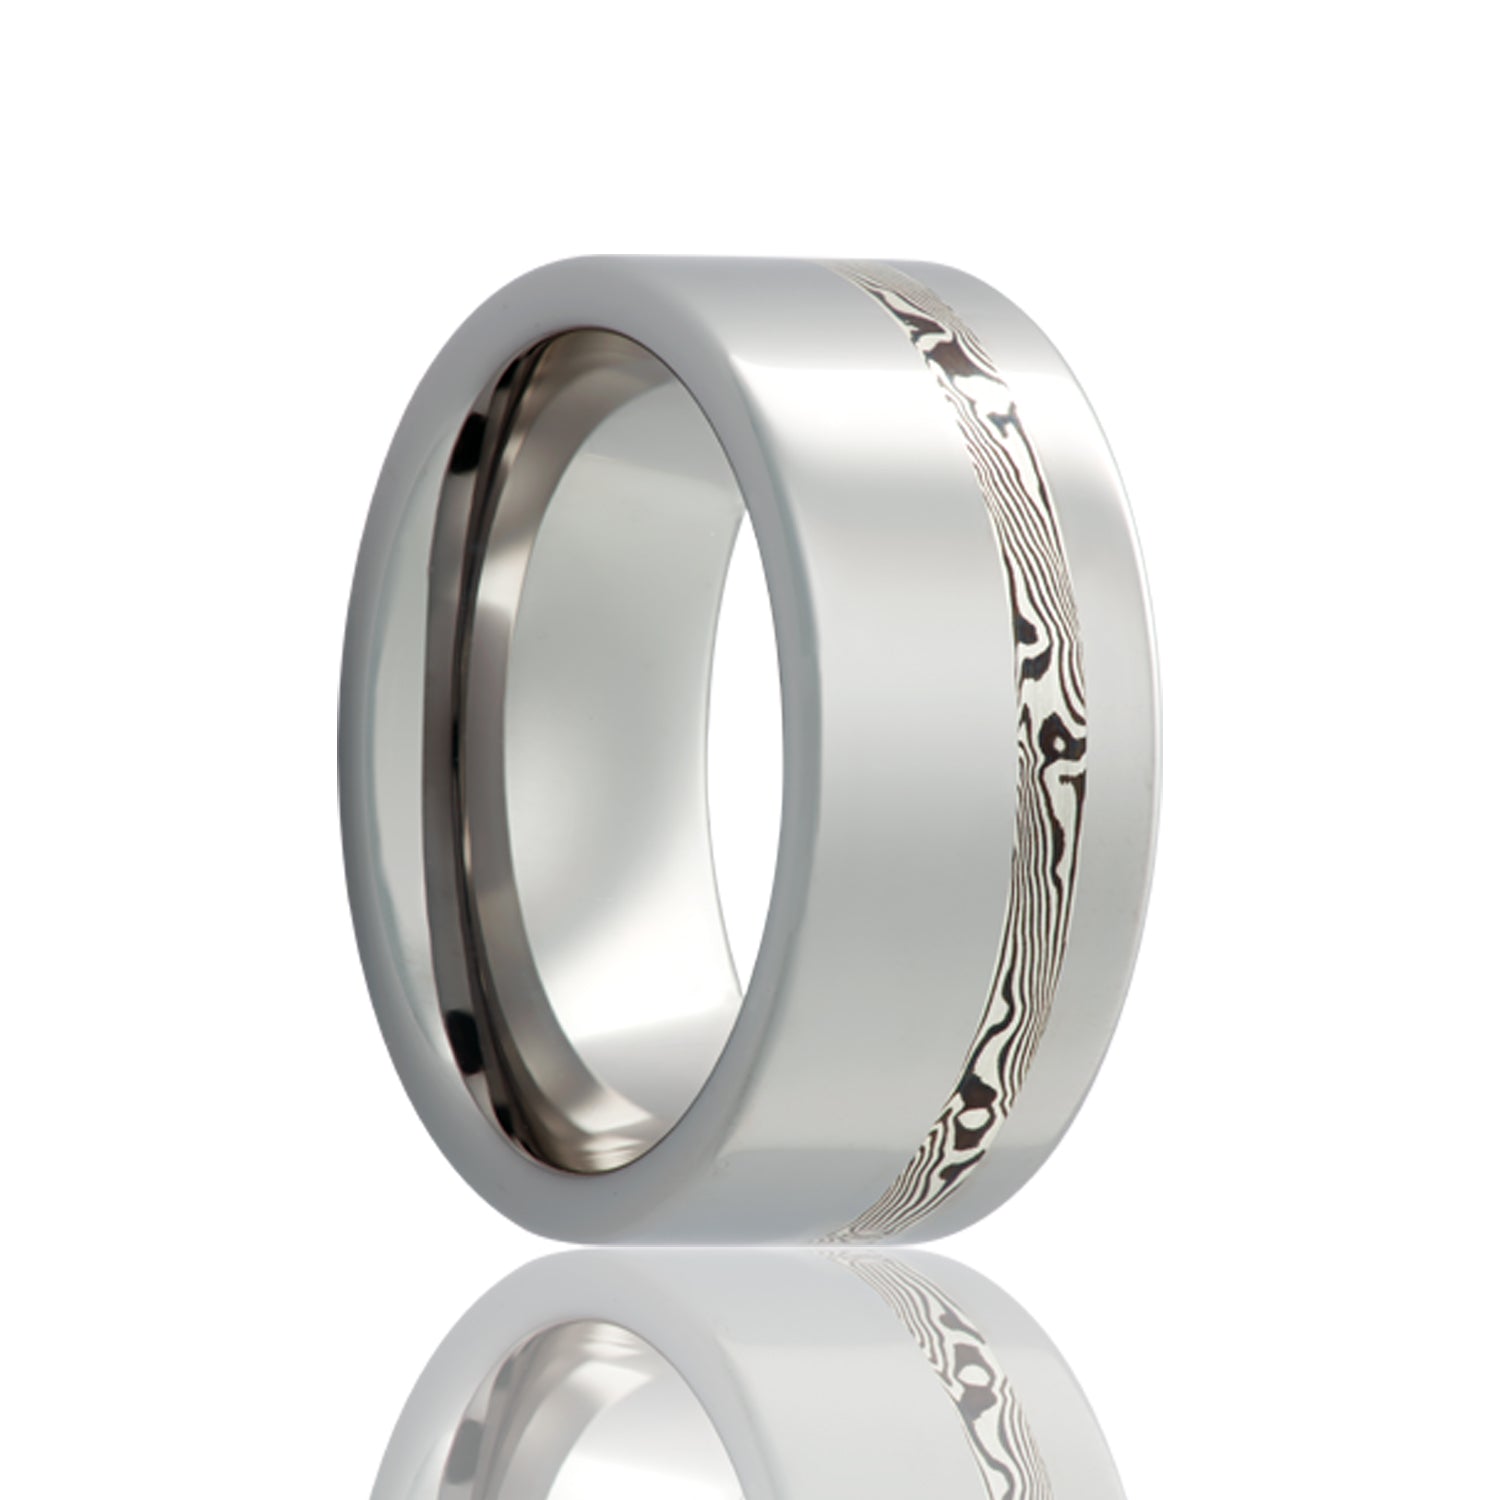 A asymmetrical sterling silver & shakudo mokume gane inlay tungsten wedding band displayed on a neutral white background.